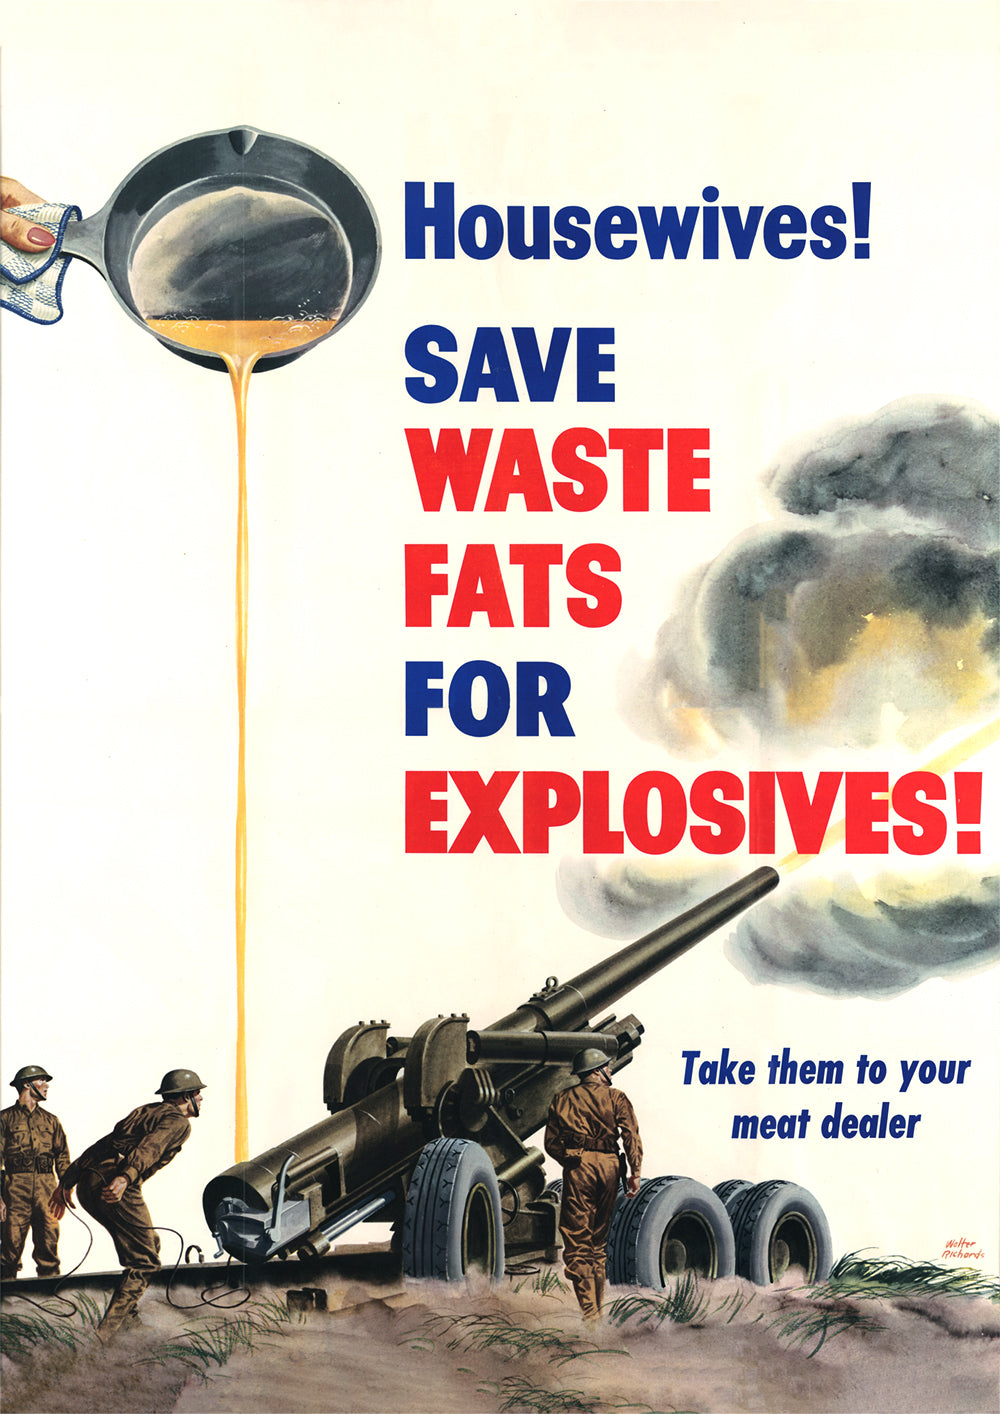 Housewives! Save waste fats for explosives! — American World War Two poster